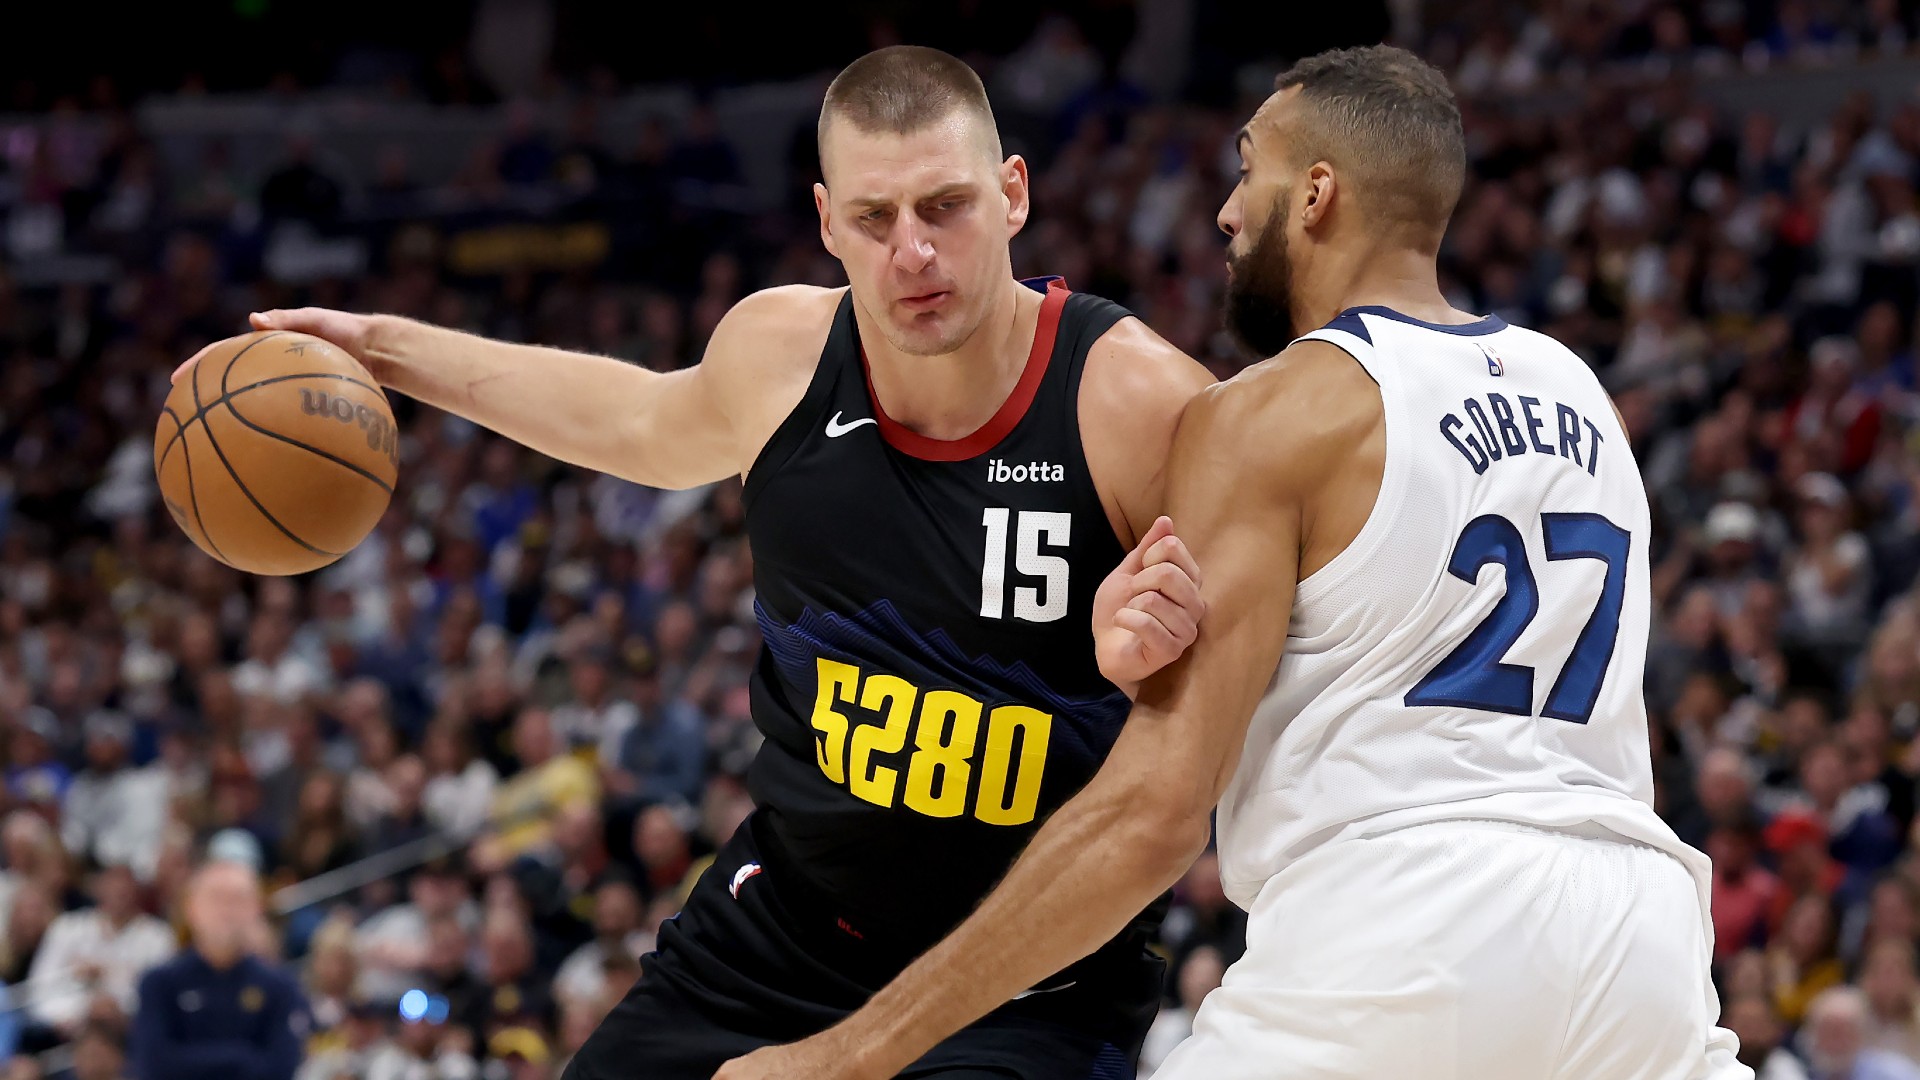 Edwards 'can't be mad' at Jokic